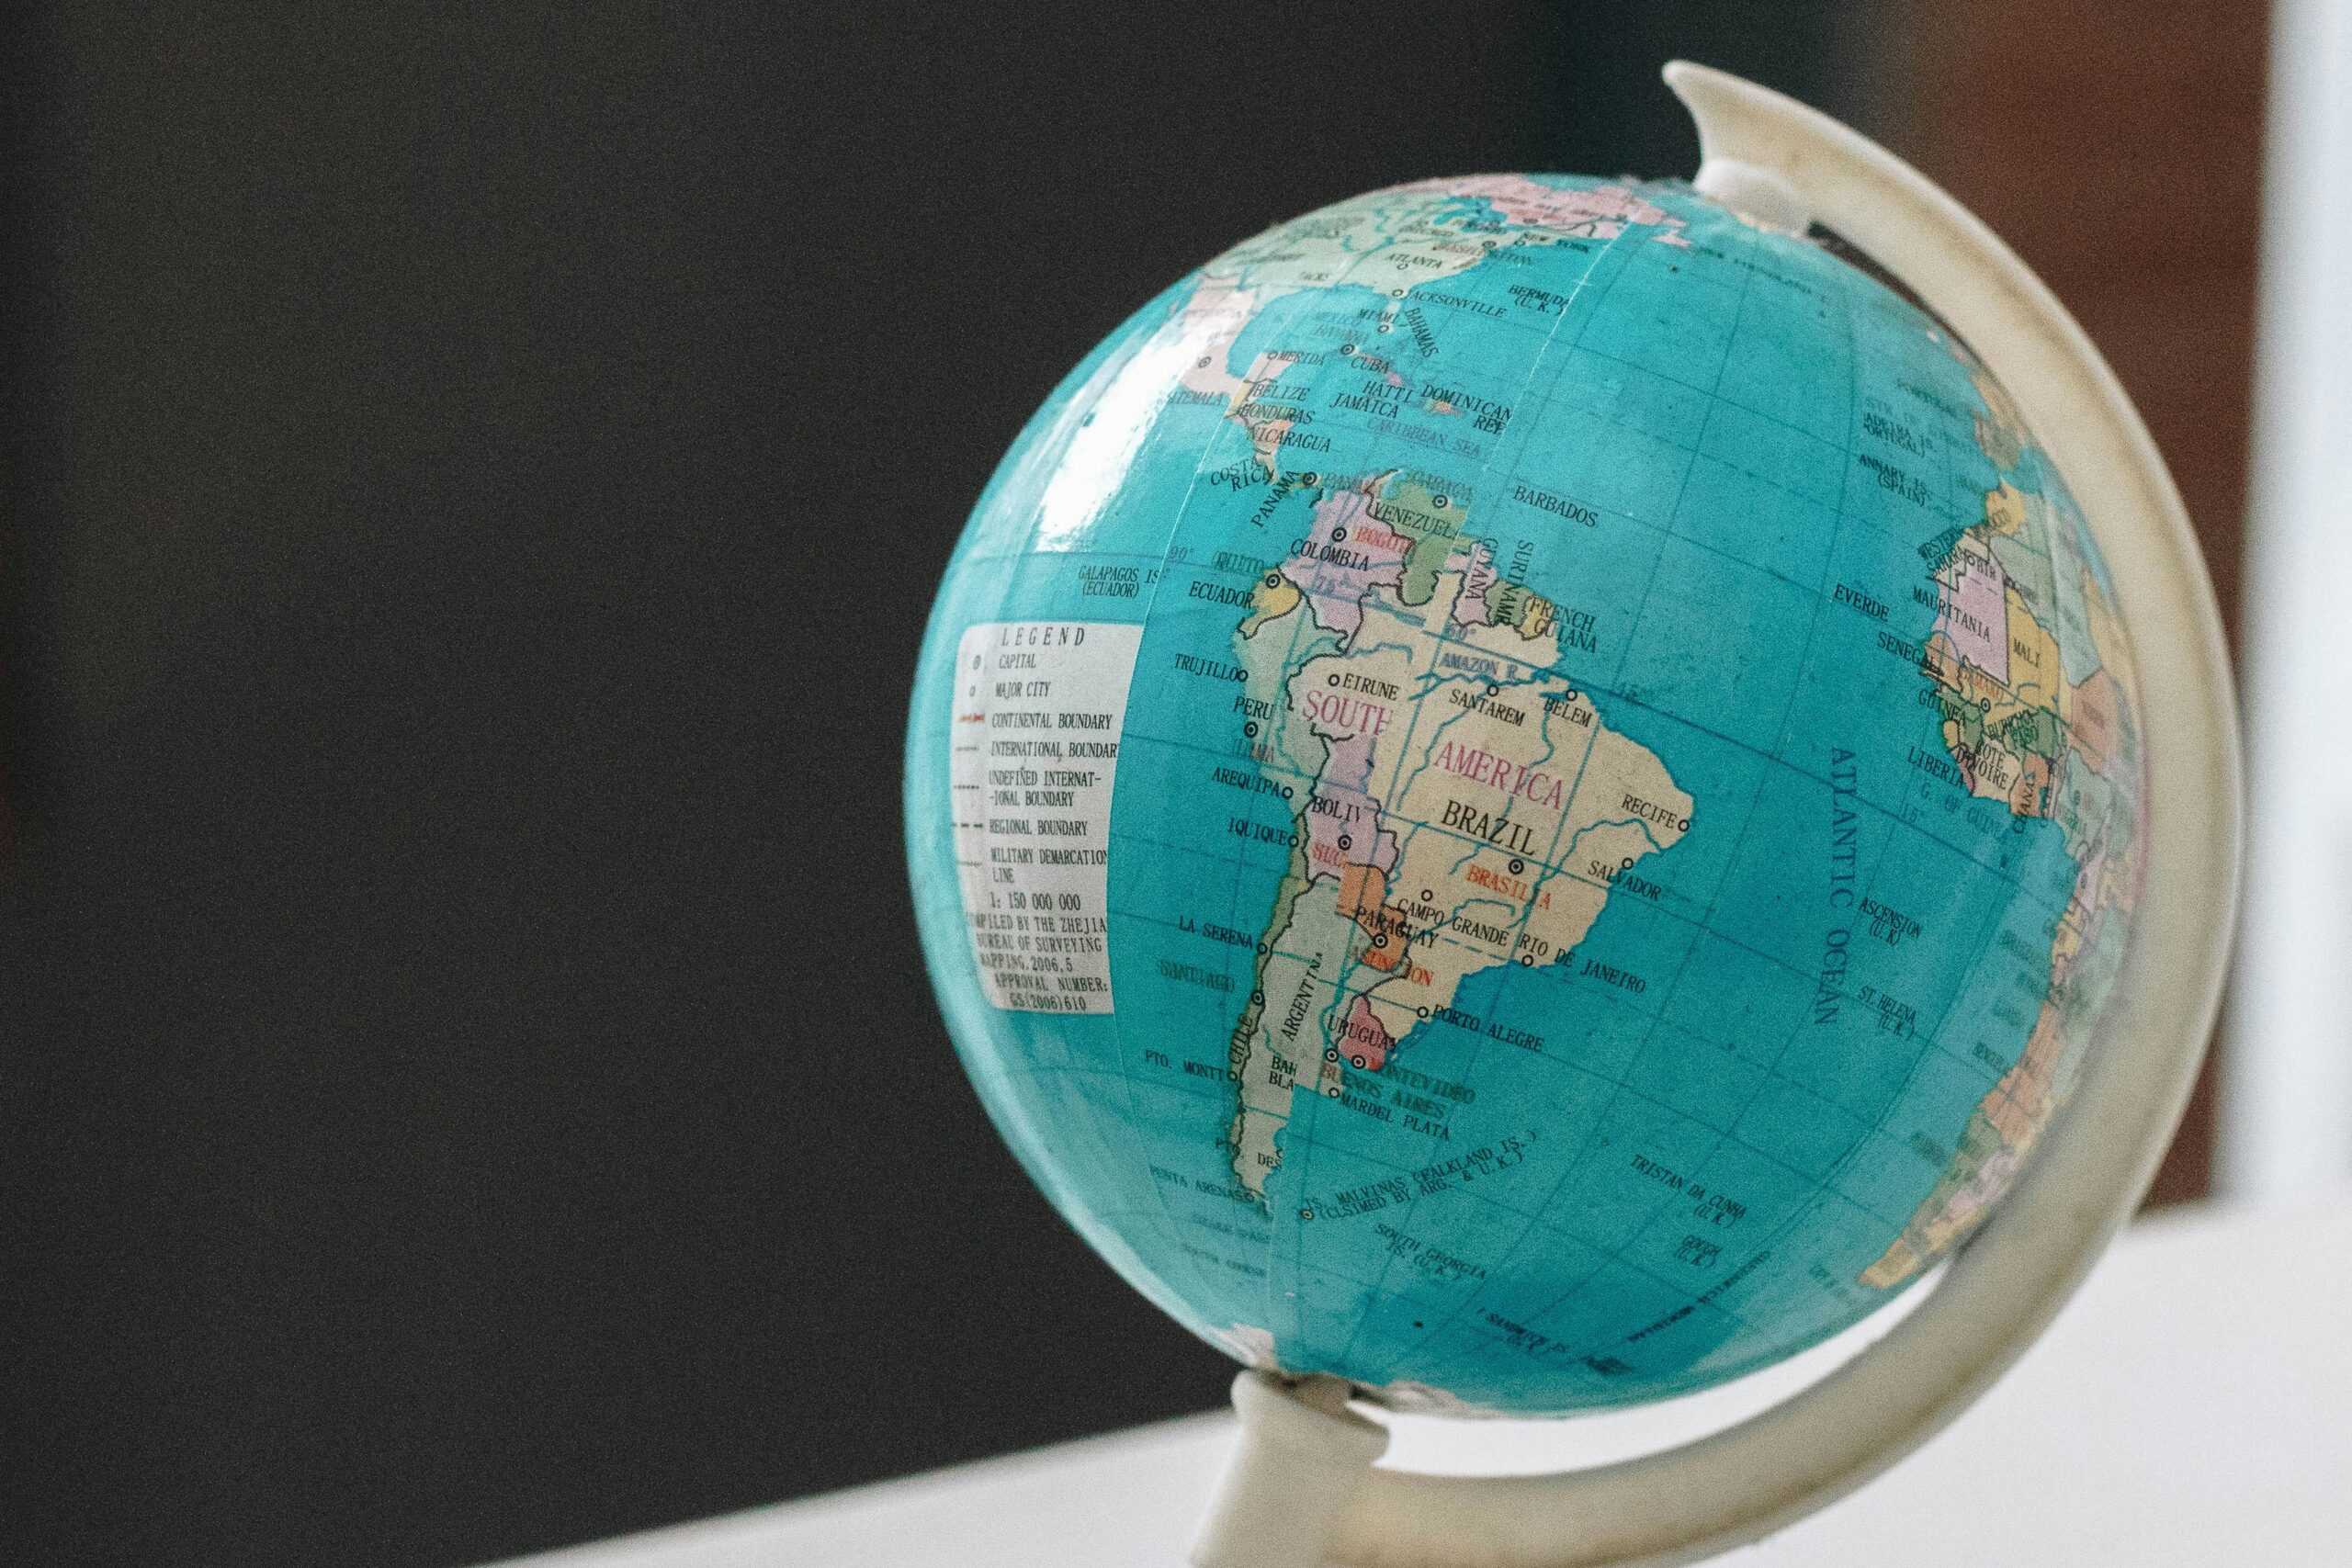 Map of South America on a globe.